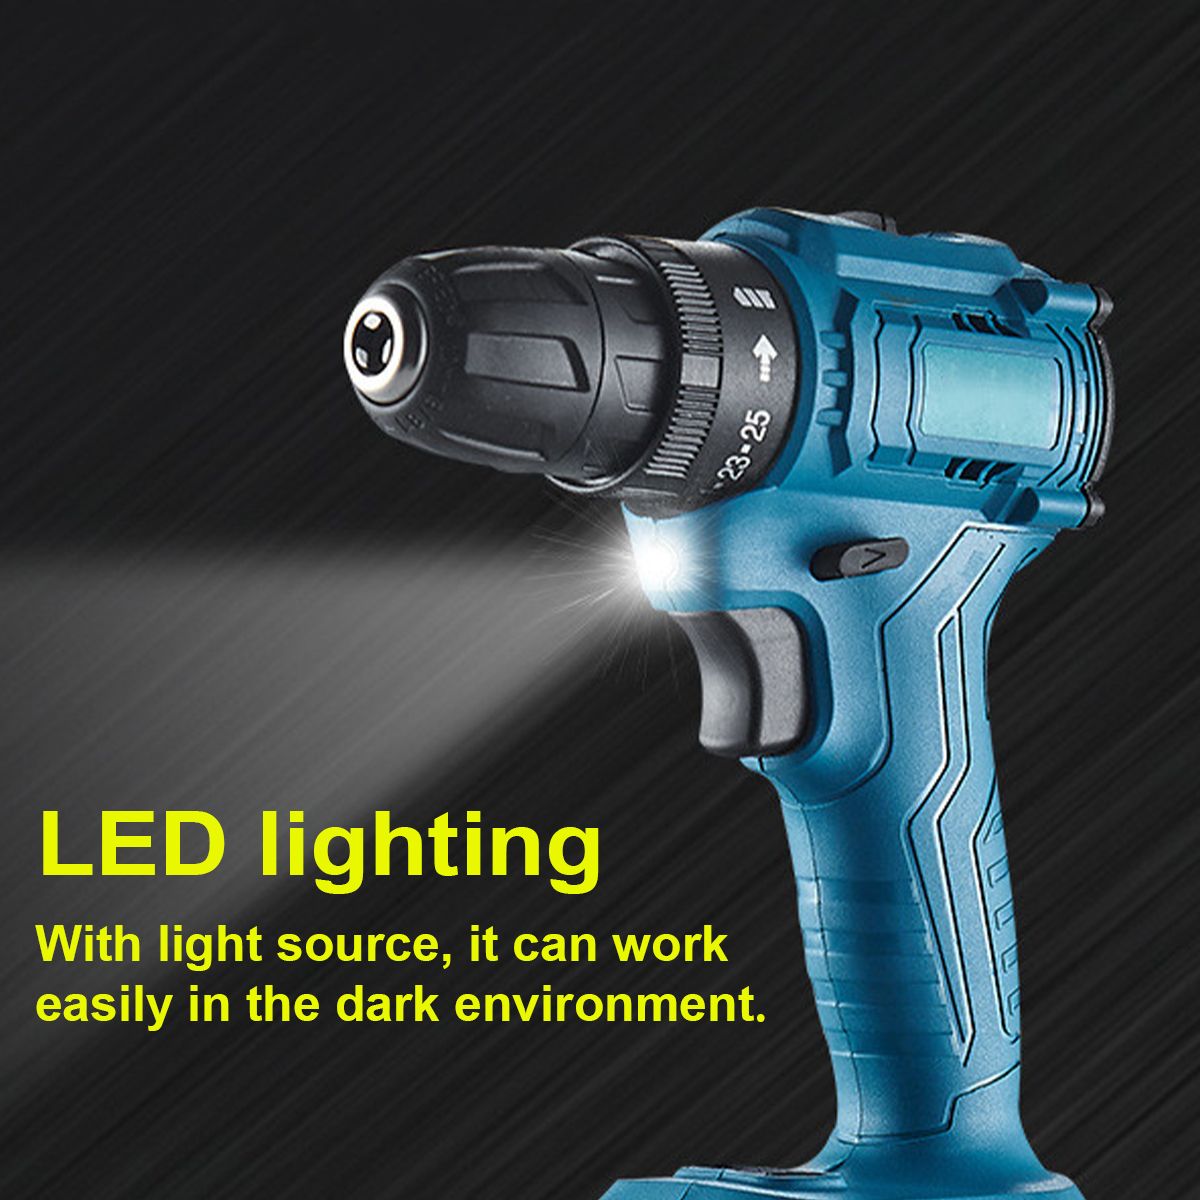 25-Torque-2-Speeds-Brushless-Cordless-Electric-Drill-Impact-Wrench-For-21V-Battery-1755849